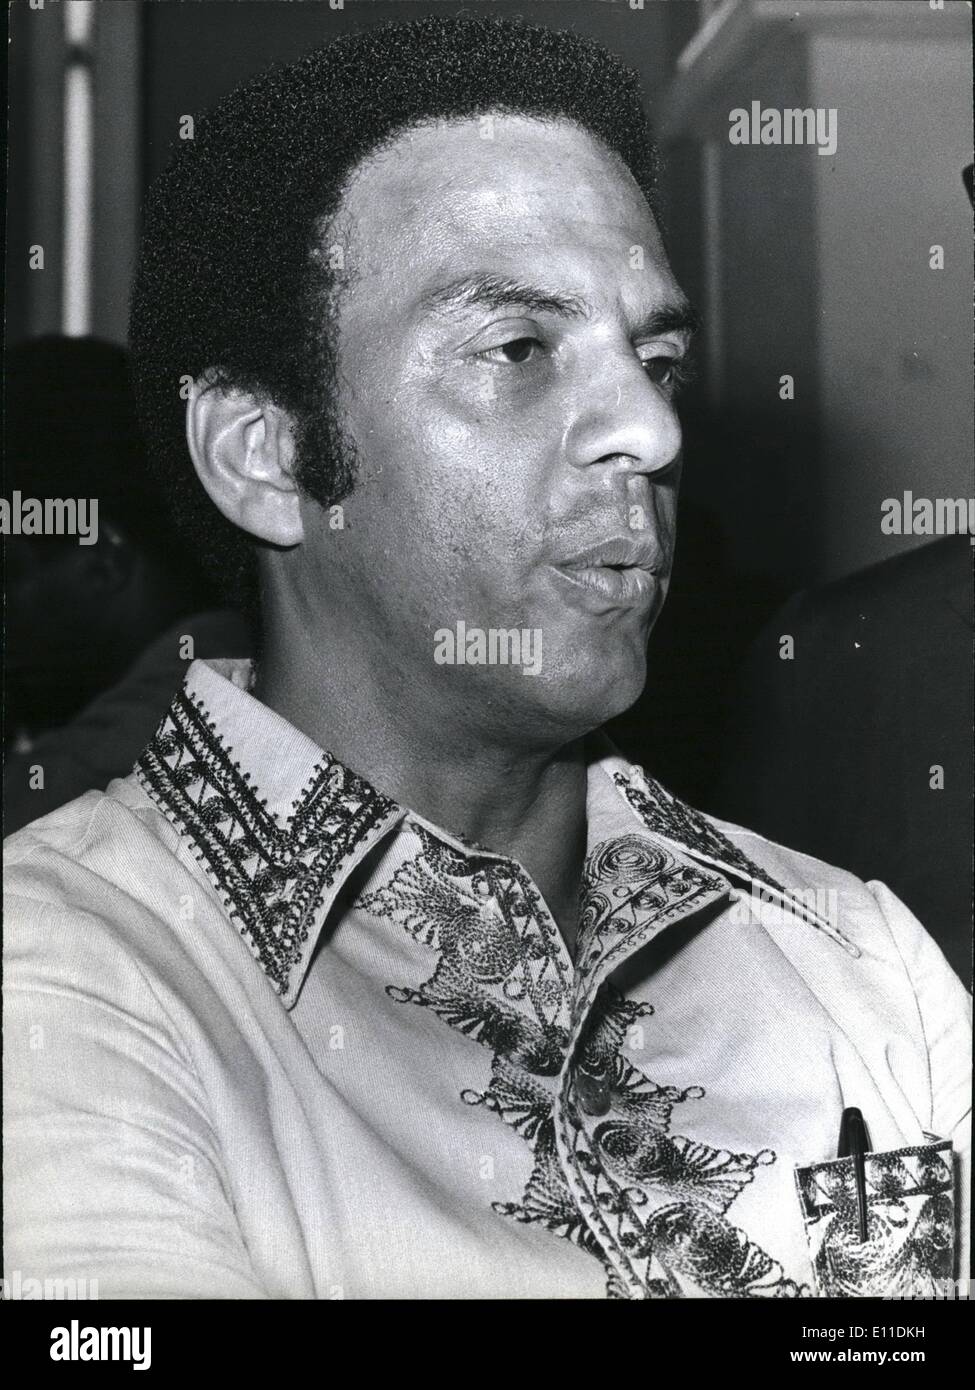 May 05, 1977 - Andrew Young : The united states ambassador to the united nations, Mr. Andrew Young during his tour of Africa. C Stock Photo